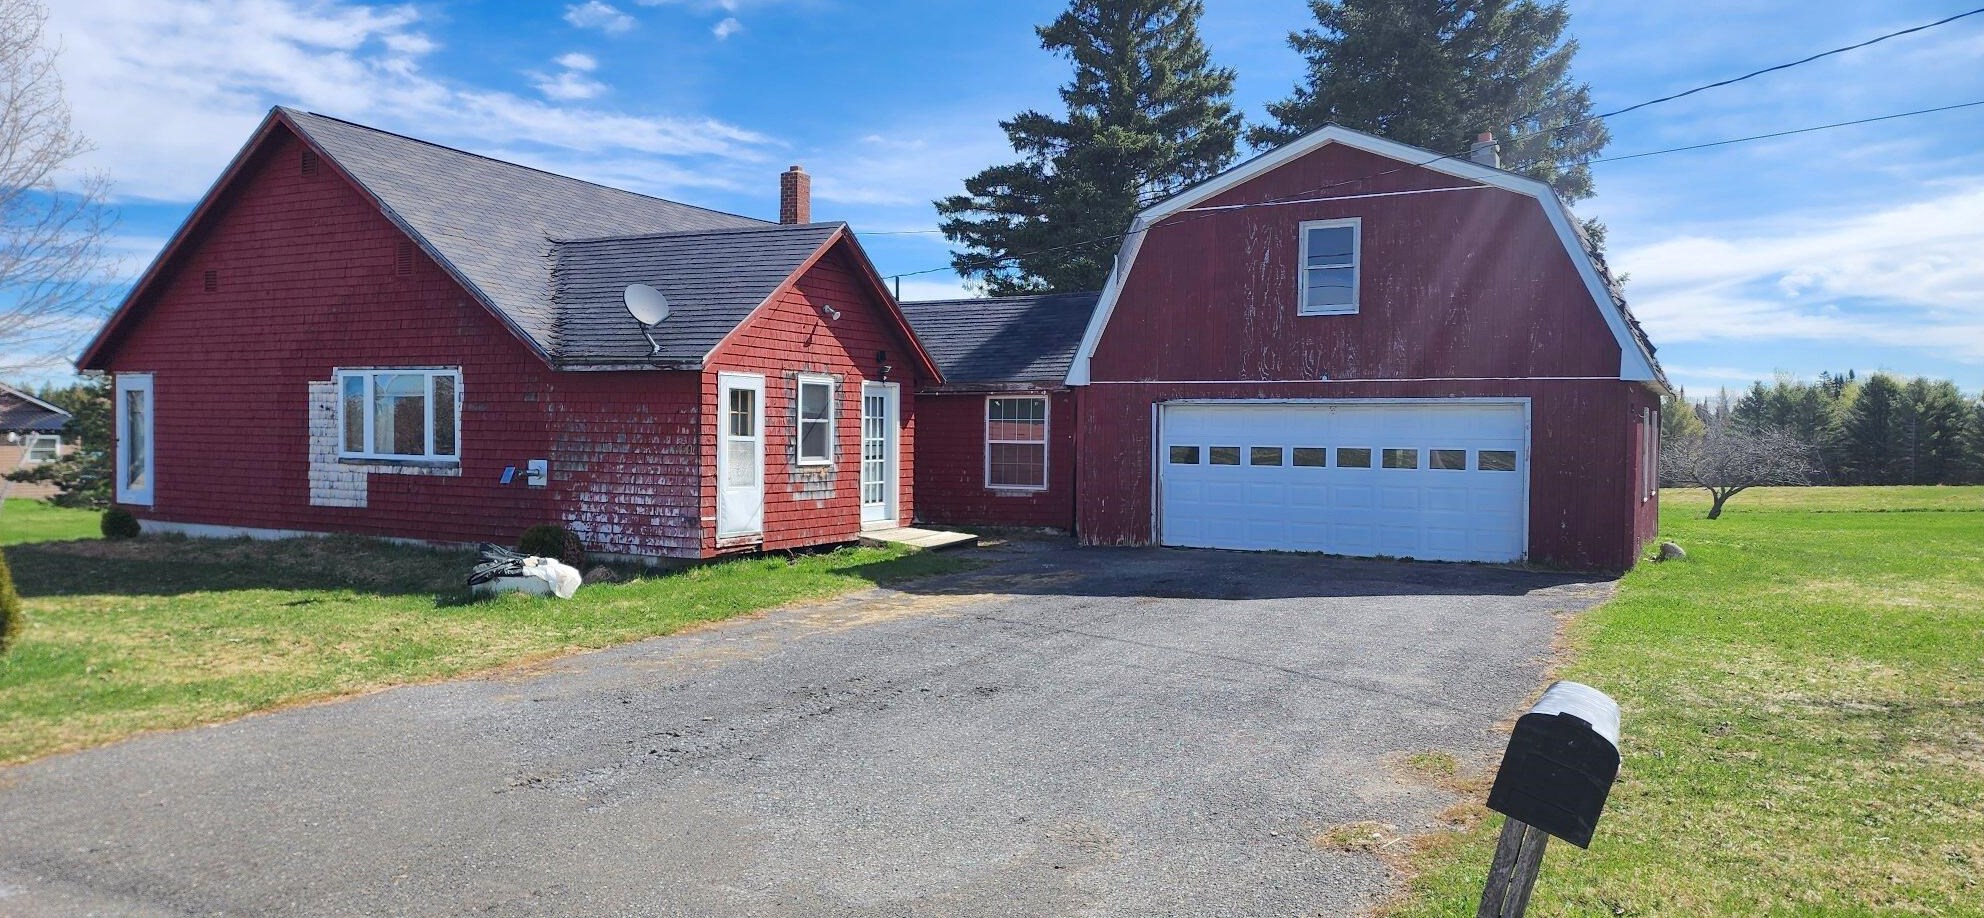 659 Forest Ave, Fort Fairfield, ME 04742